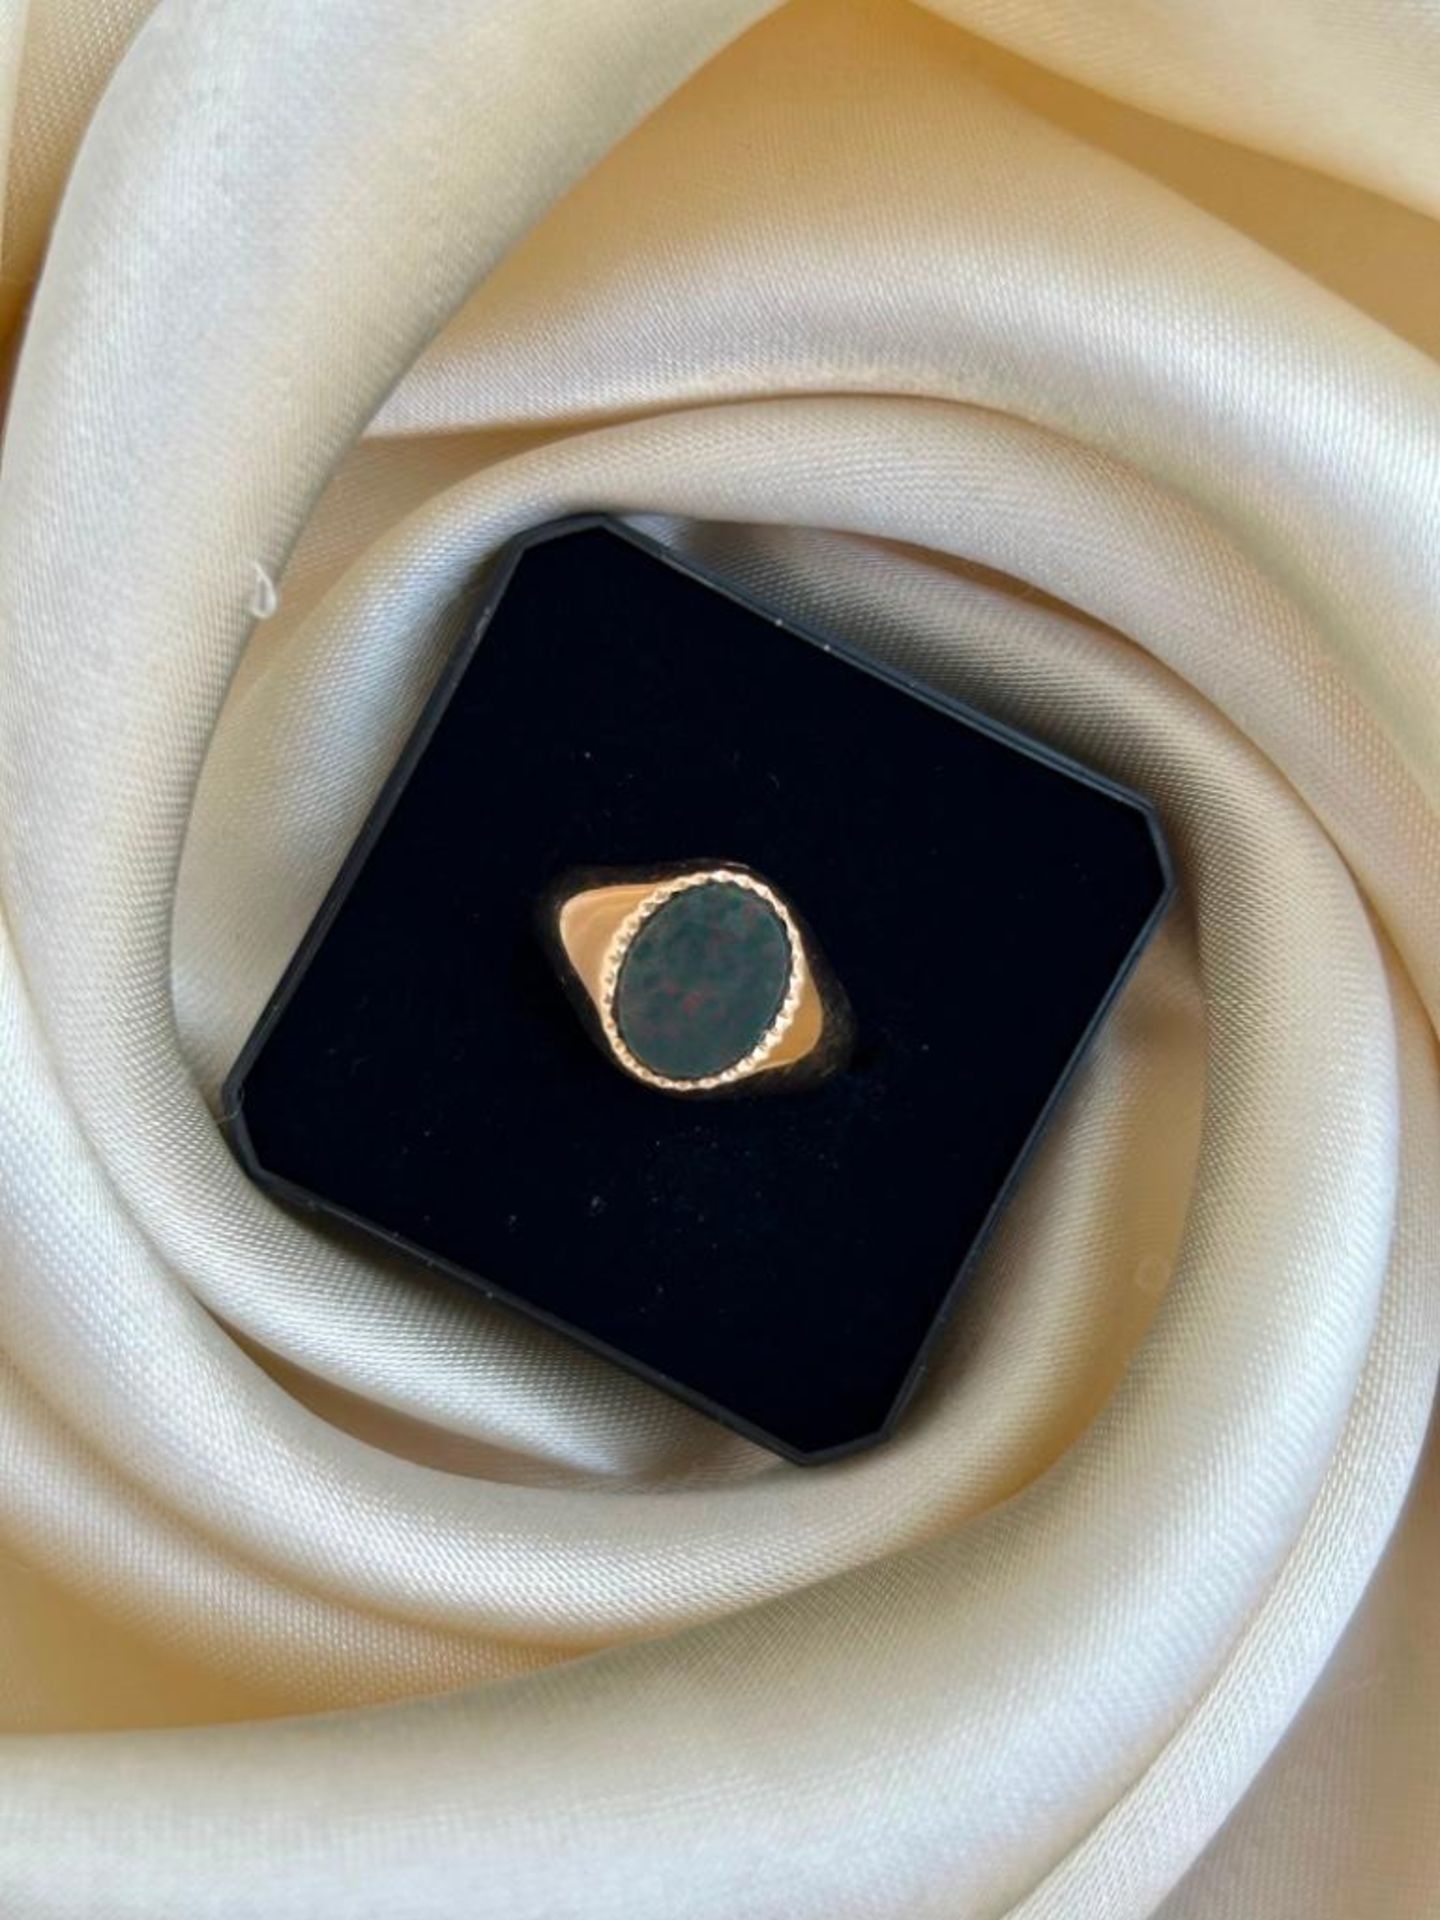 Vintage 9ct Yellow Gold and Onyx Signet Ring - Image 3 of 6